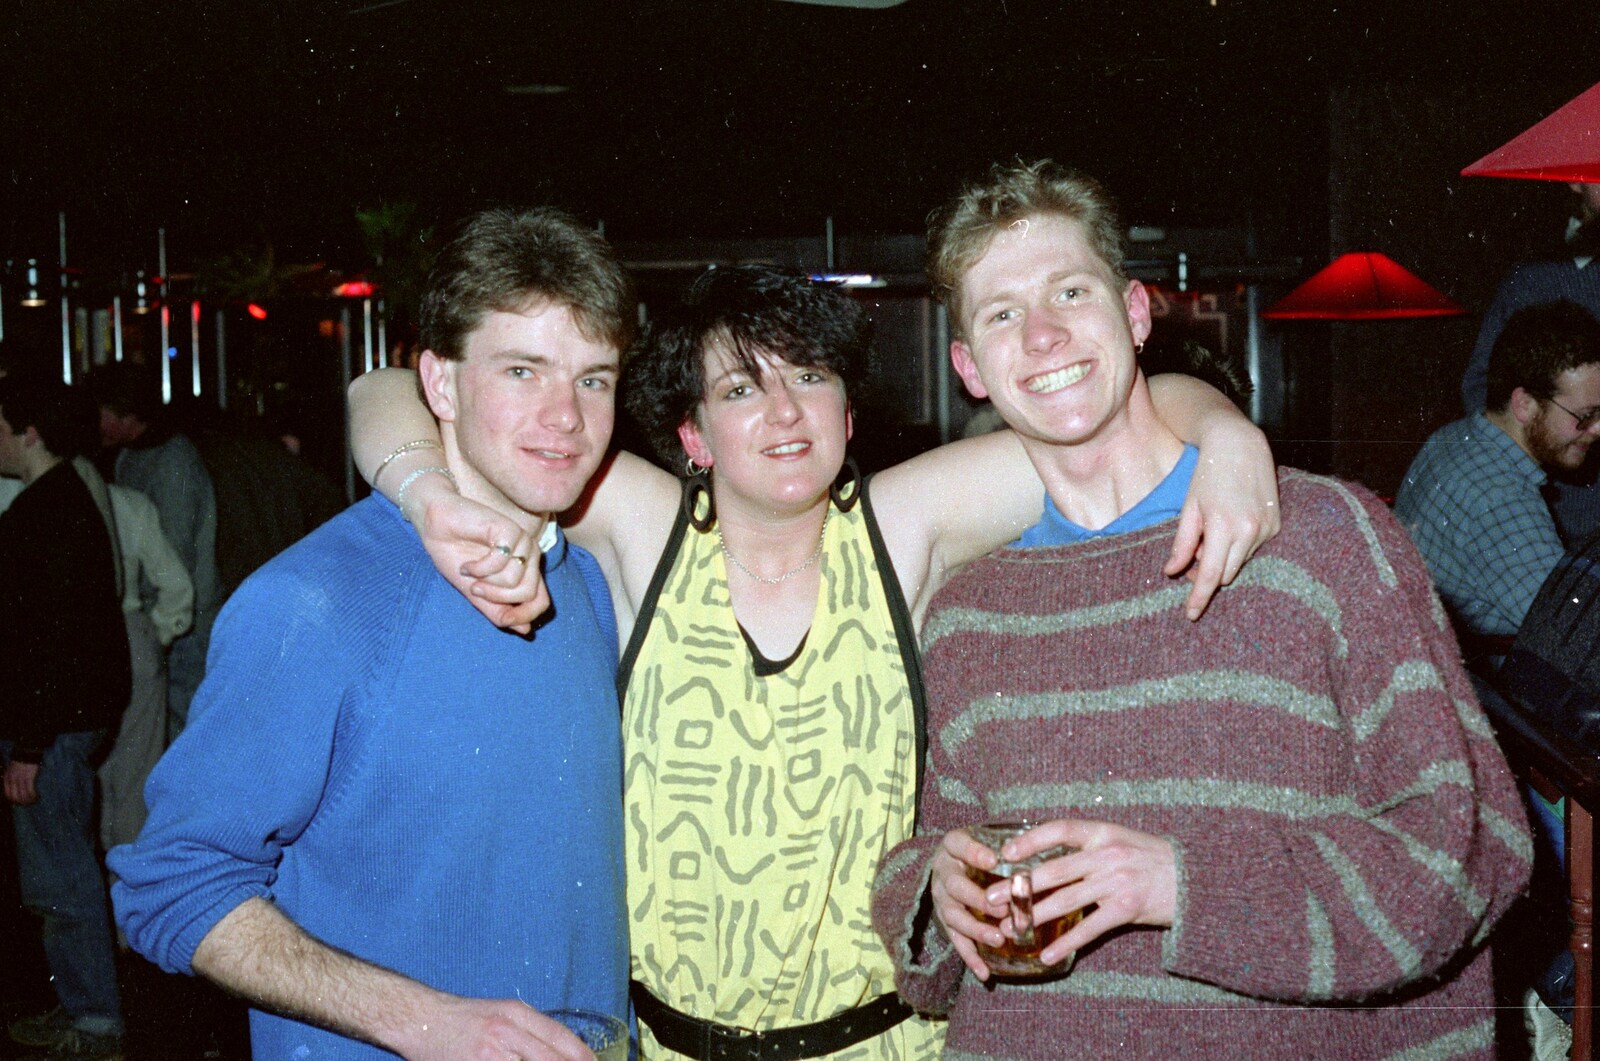 A couple more guests from Uni: A Party in Snobs Nightclub, Mayflower Street, Plymouth - 18th October 1986